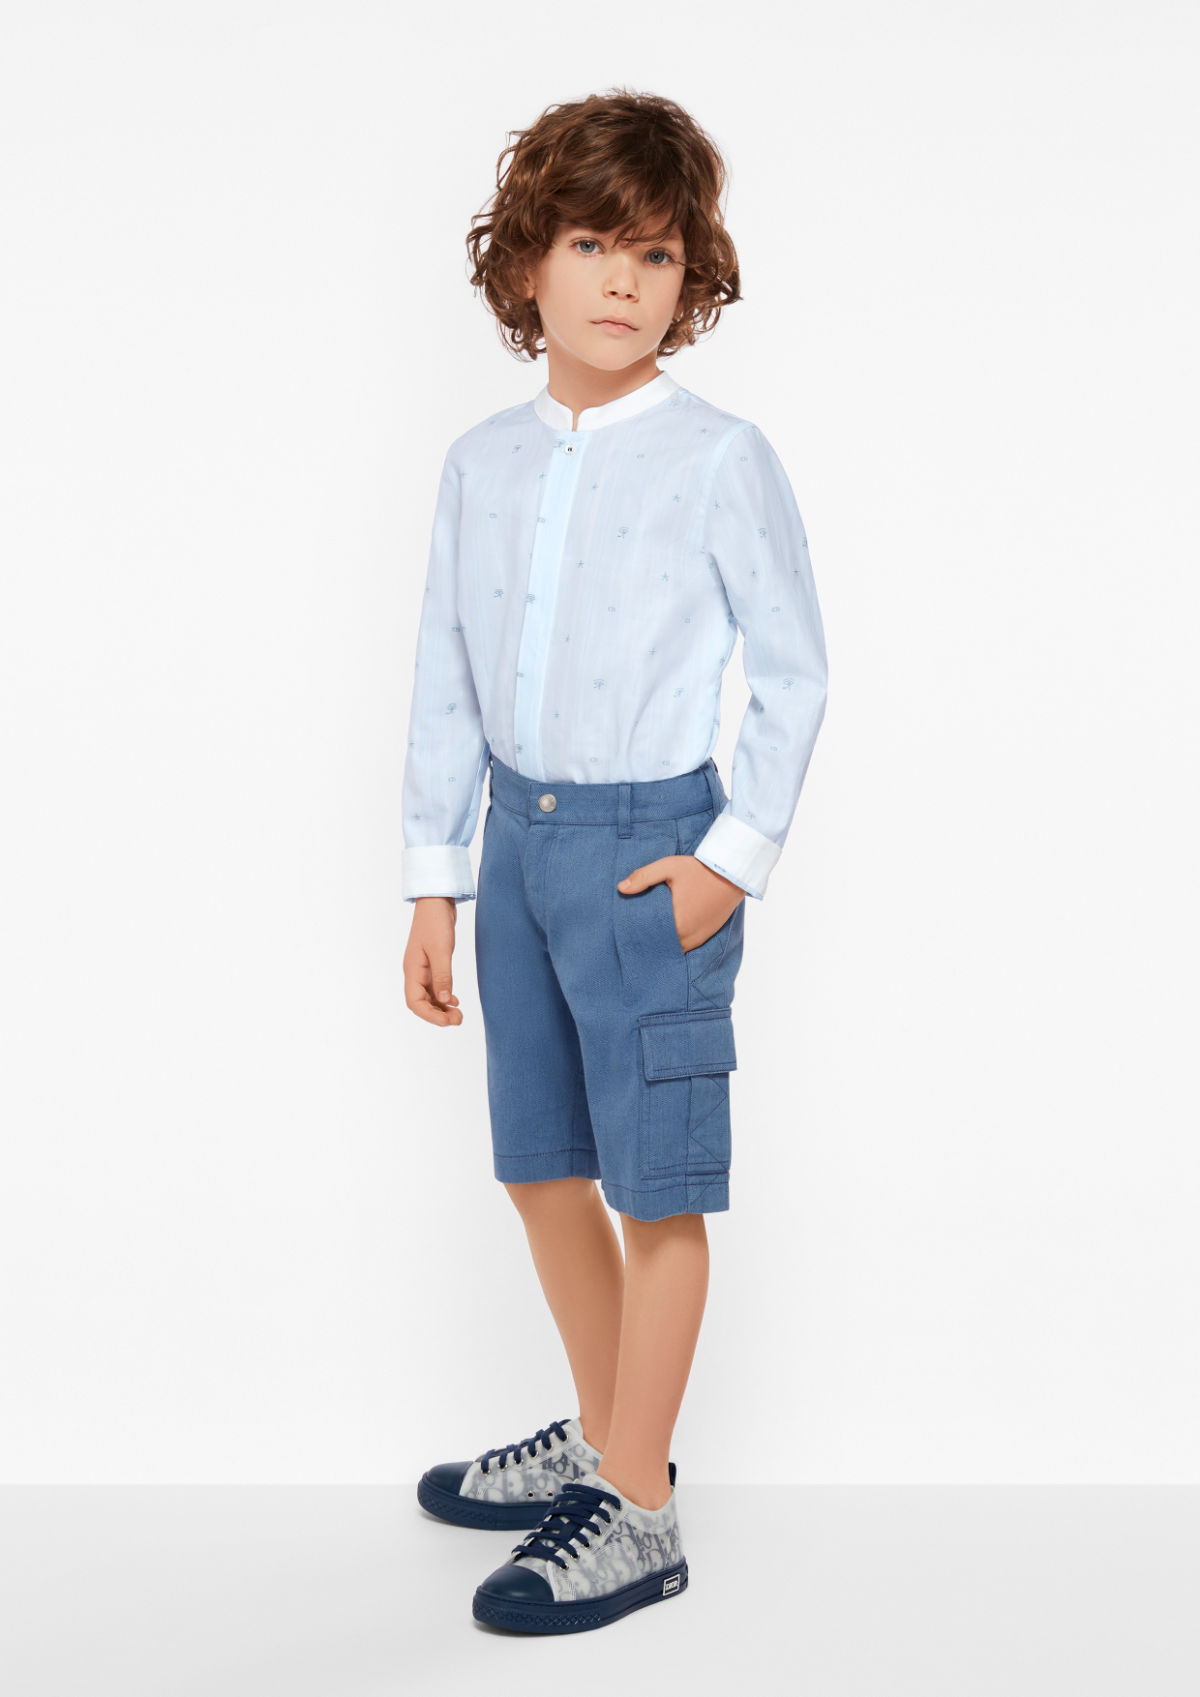 Dior Kids Ready-To-Wear: Boys Autumn-Winter 2020-21 Collection